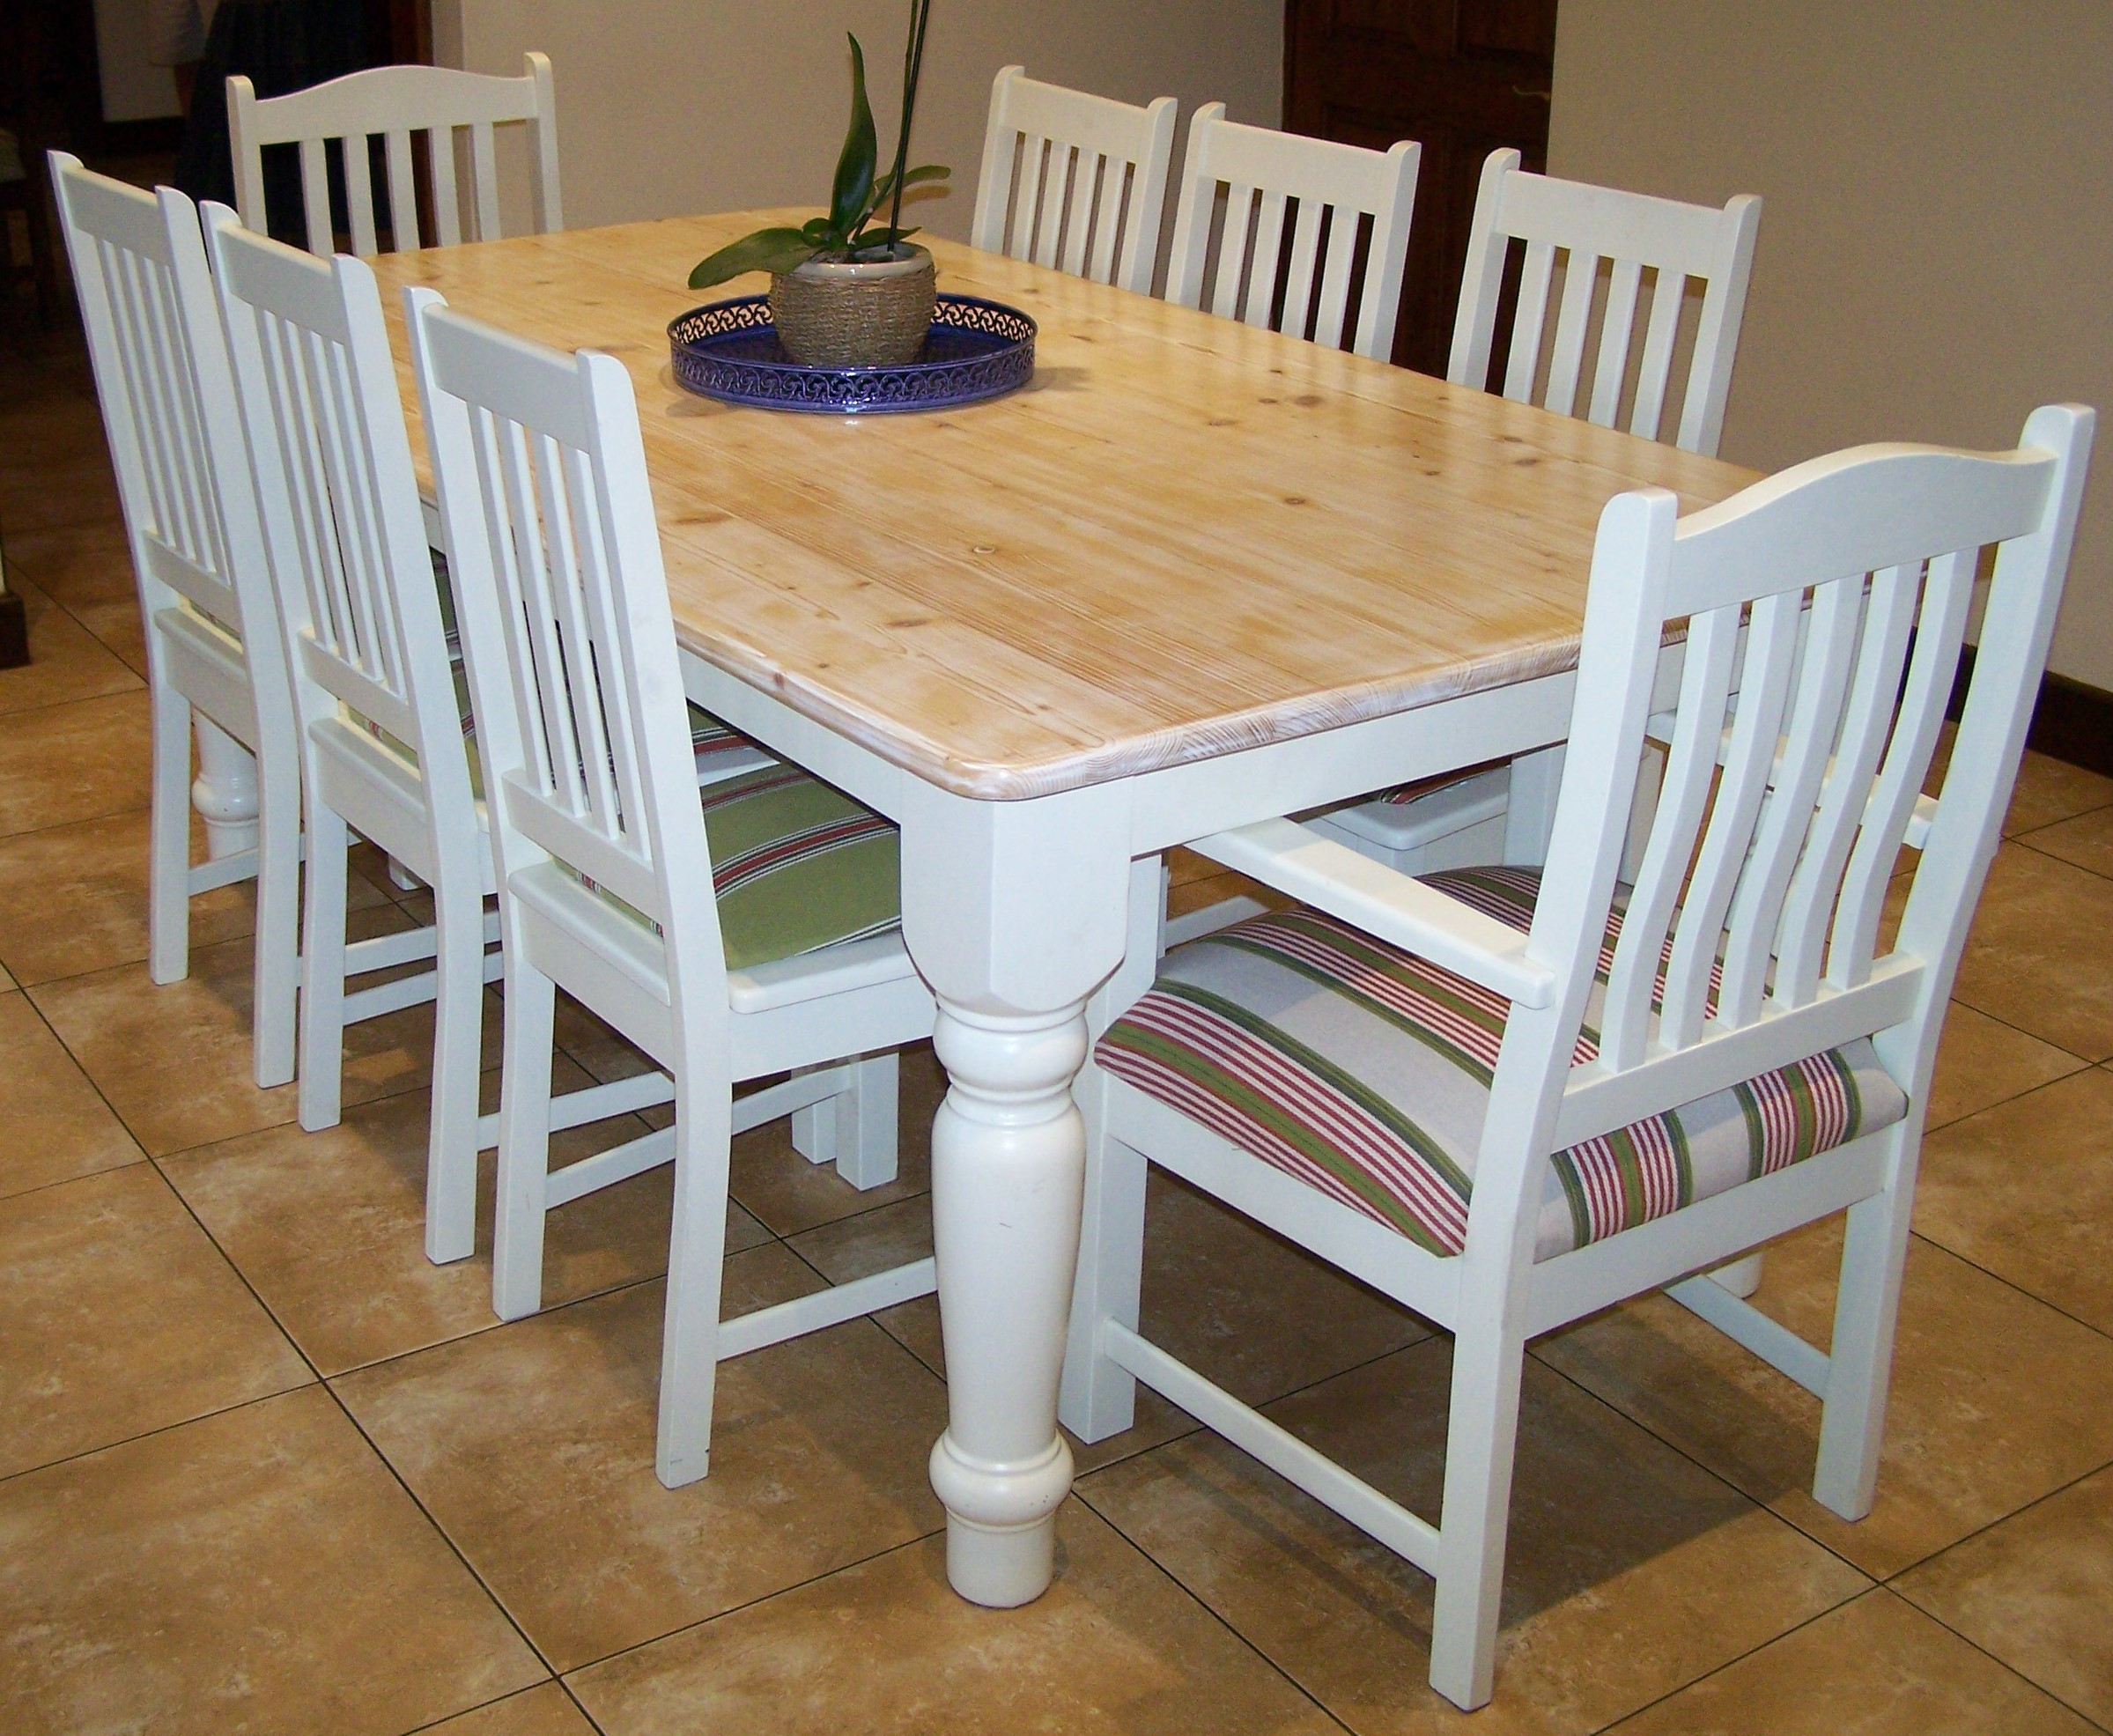 Dining room table and chairs.  Table top is solid.  Chairs upholstered.